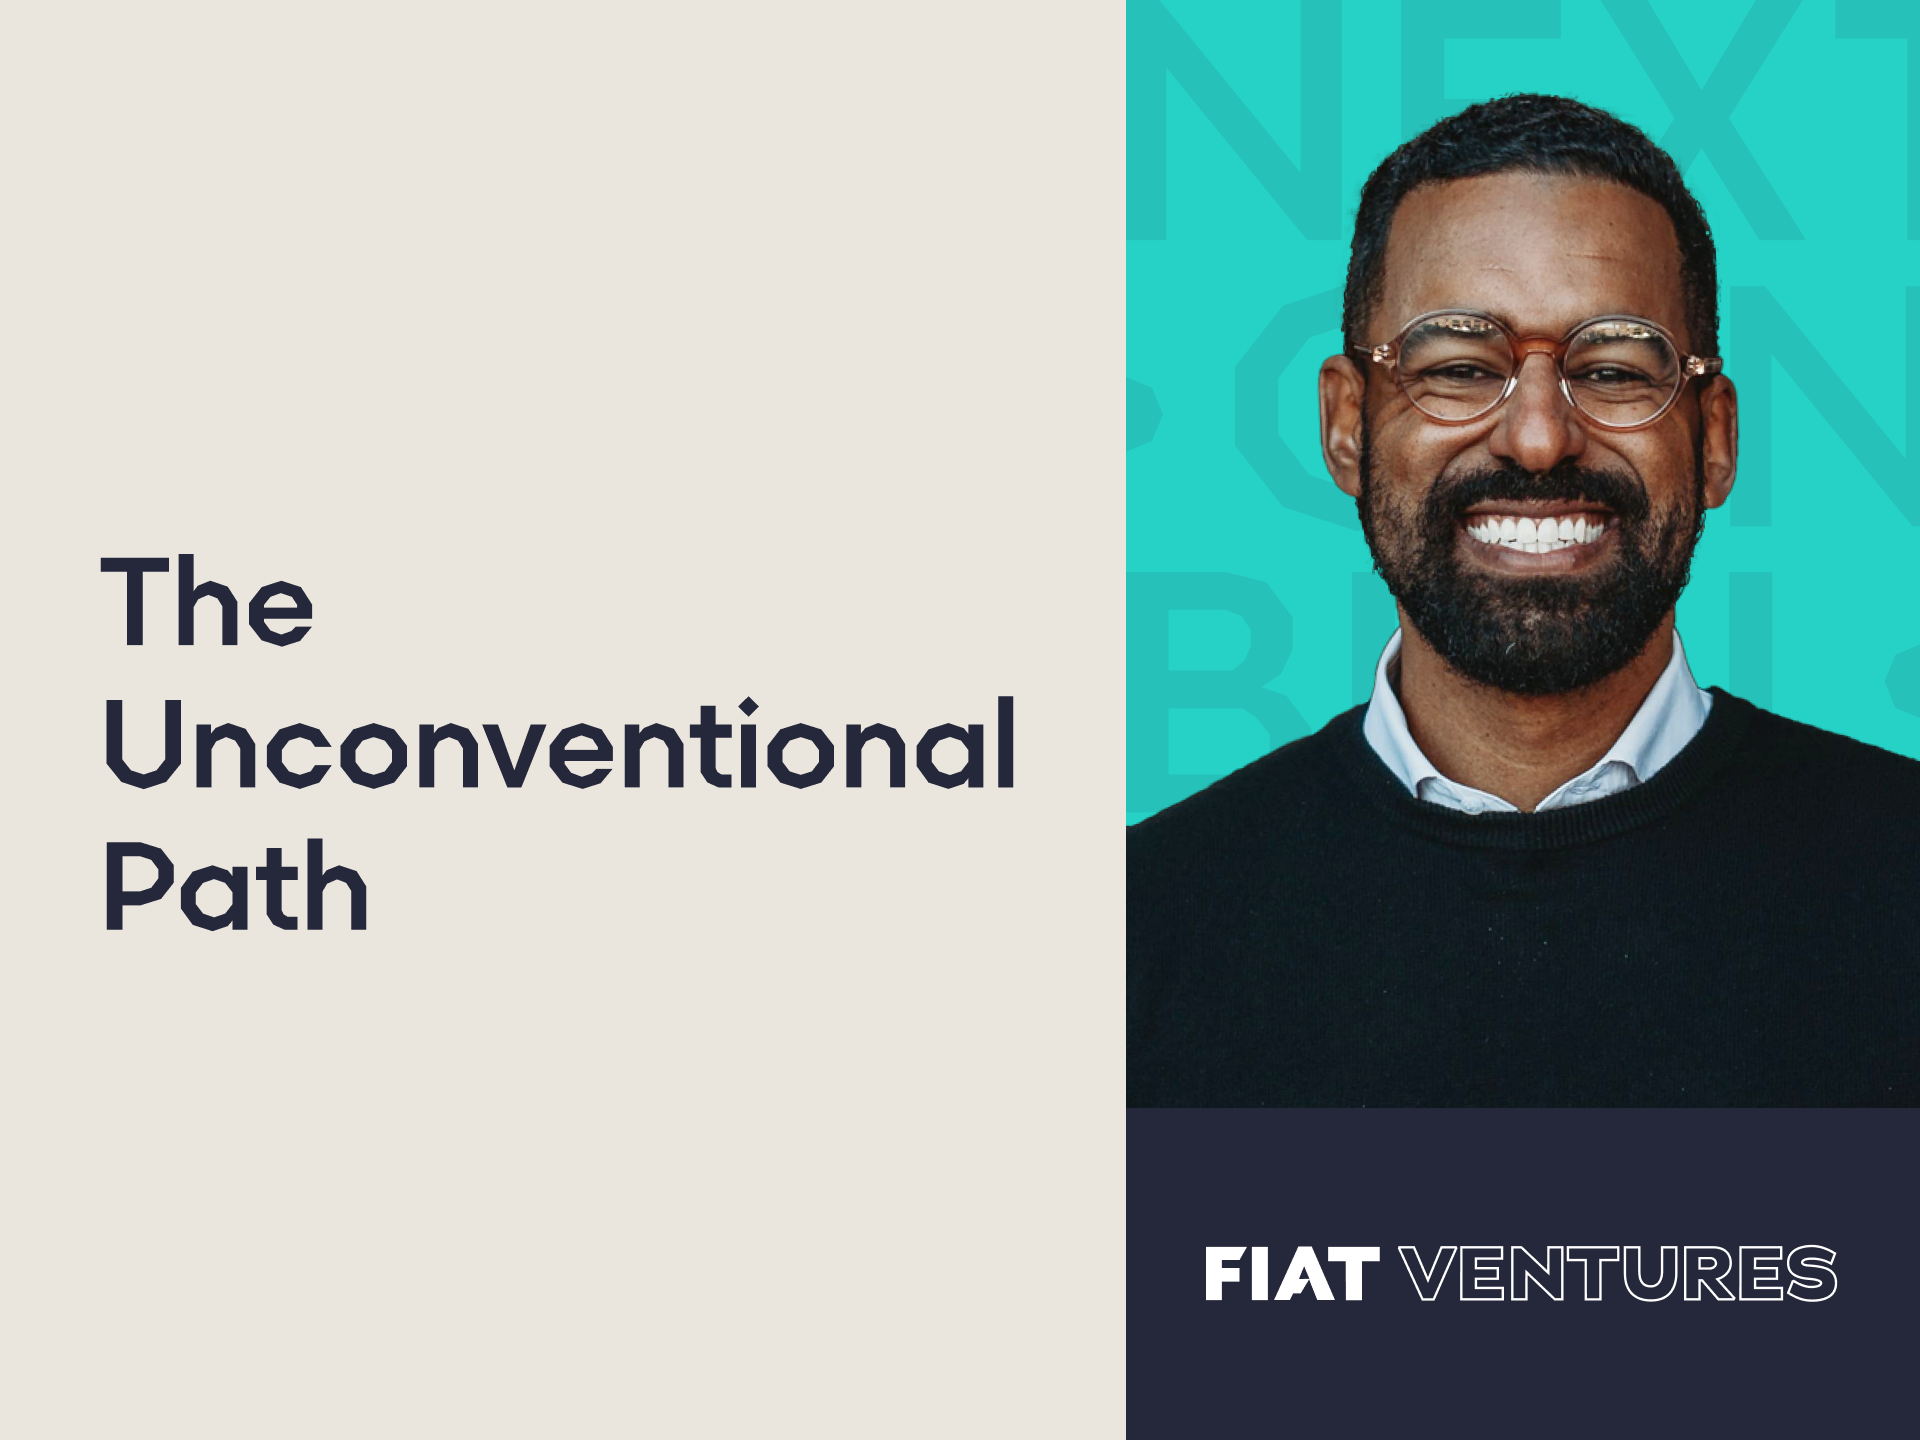 Next Gen Builders Podcast episode 2 title "The unconventional path" with headshot of the guest, Drew Glover with FIAT Ventures